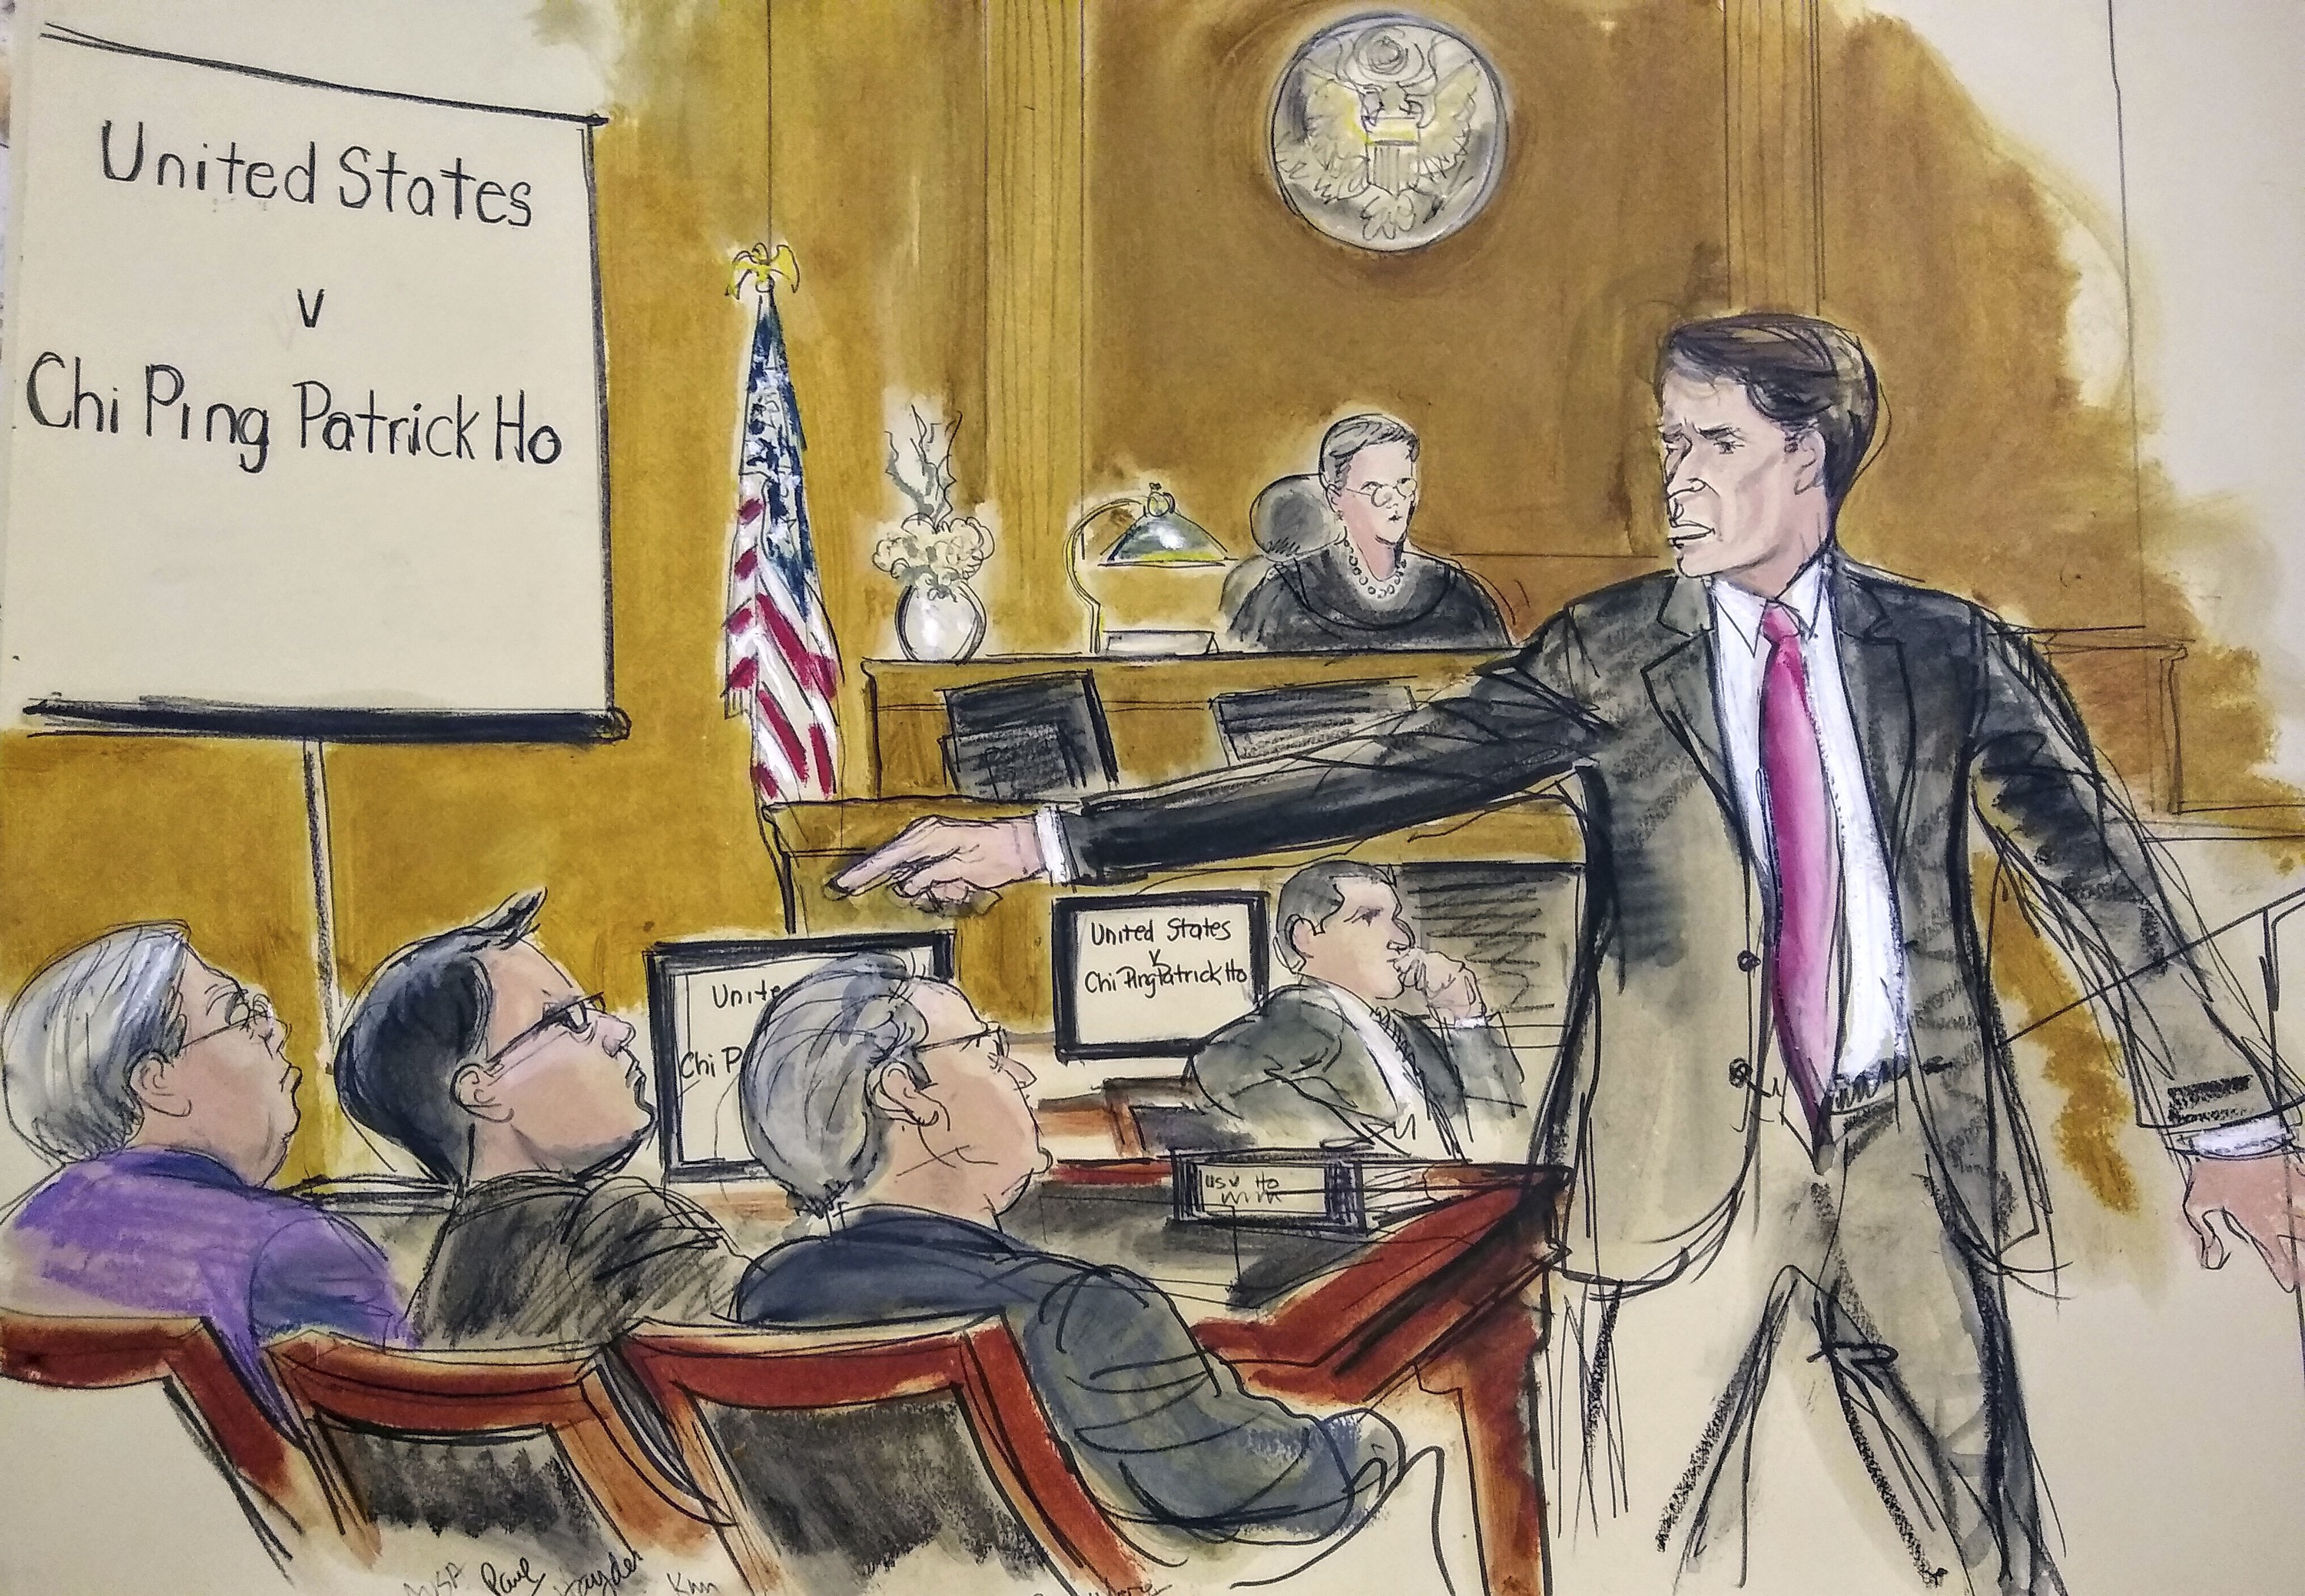 In this courtroom sketch, Assistant US Attorney Paul Hayden points at defendant Patrick Ho (seated far left) during opening statements. Illustration: Elizabeth Williams via AP